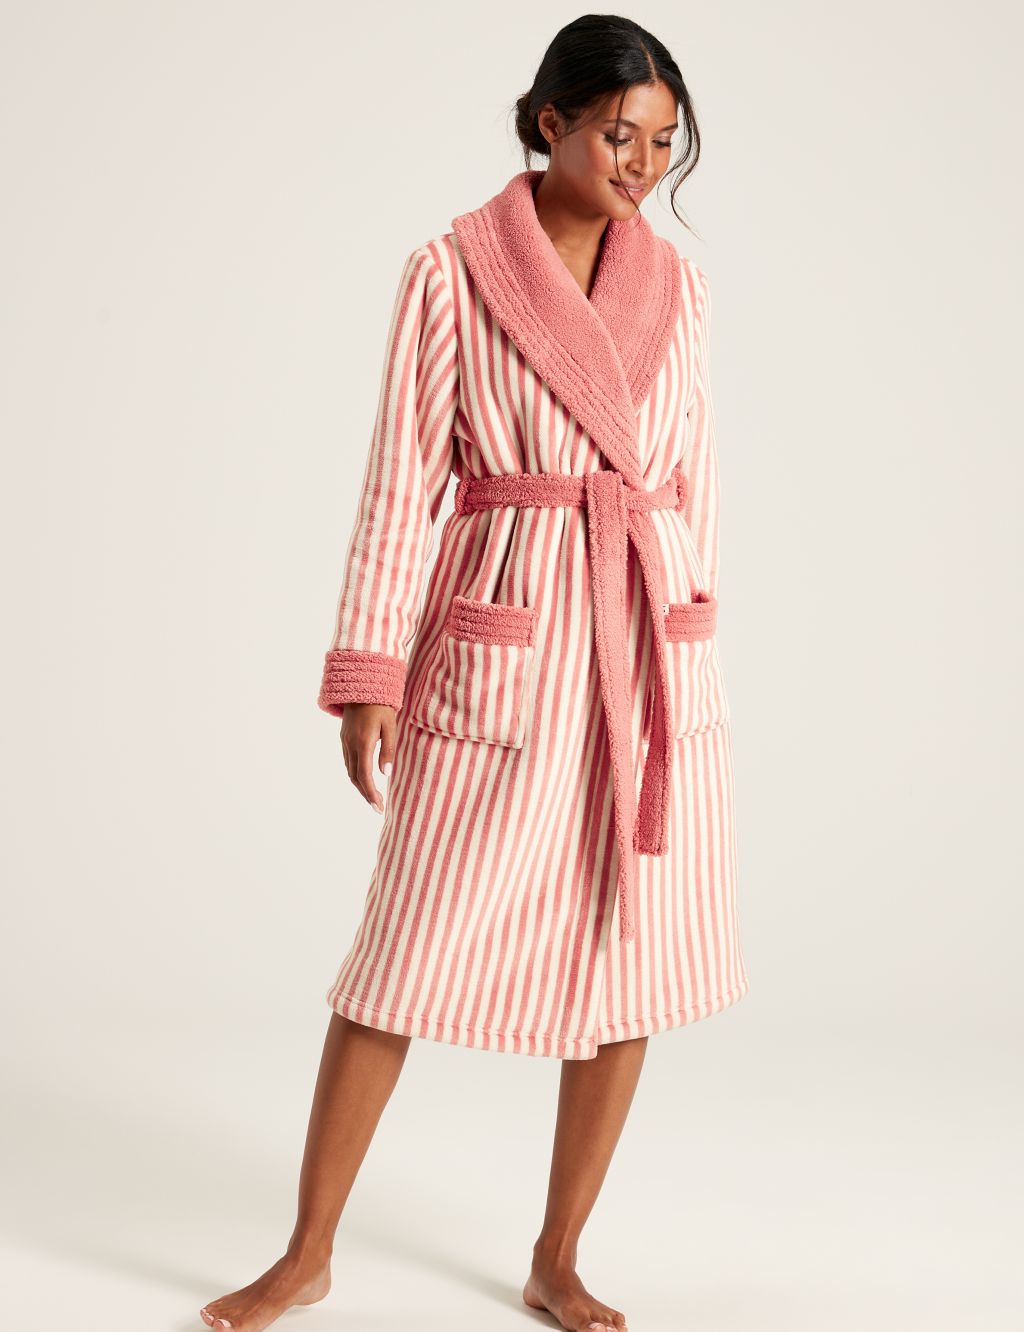 Cotton Modal Fleece Striped Dressing Gown image 3